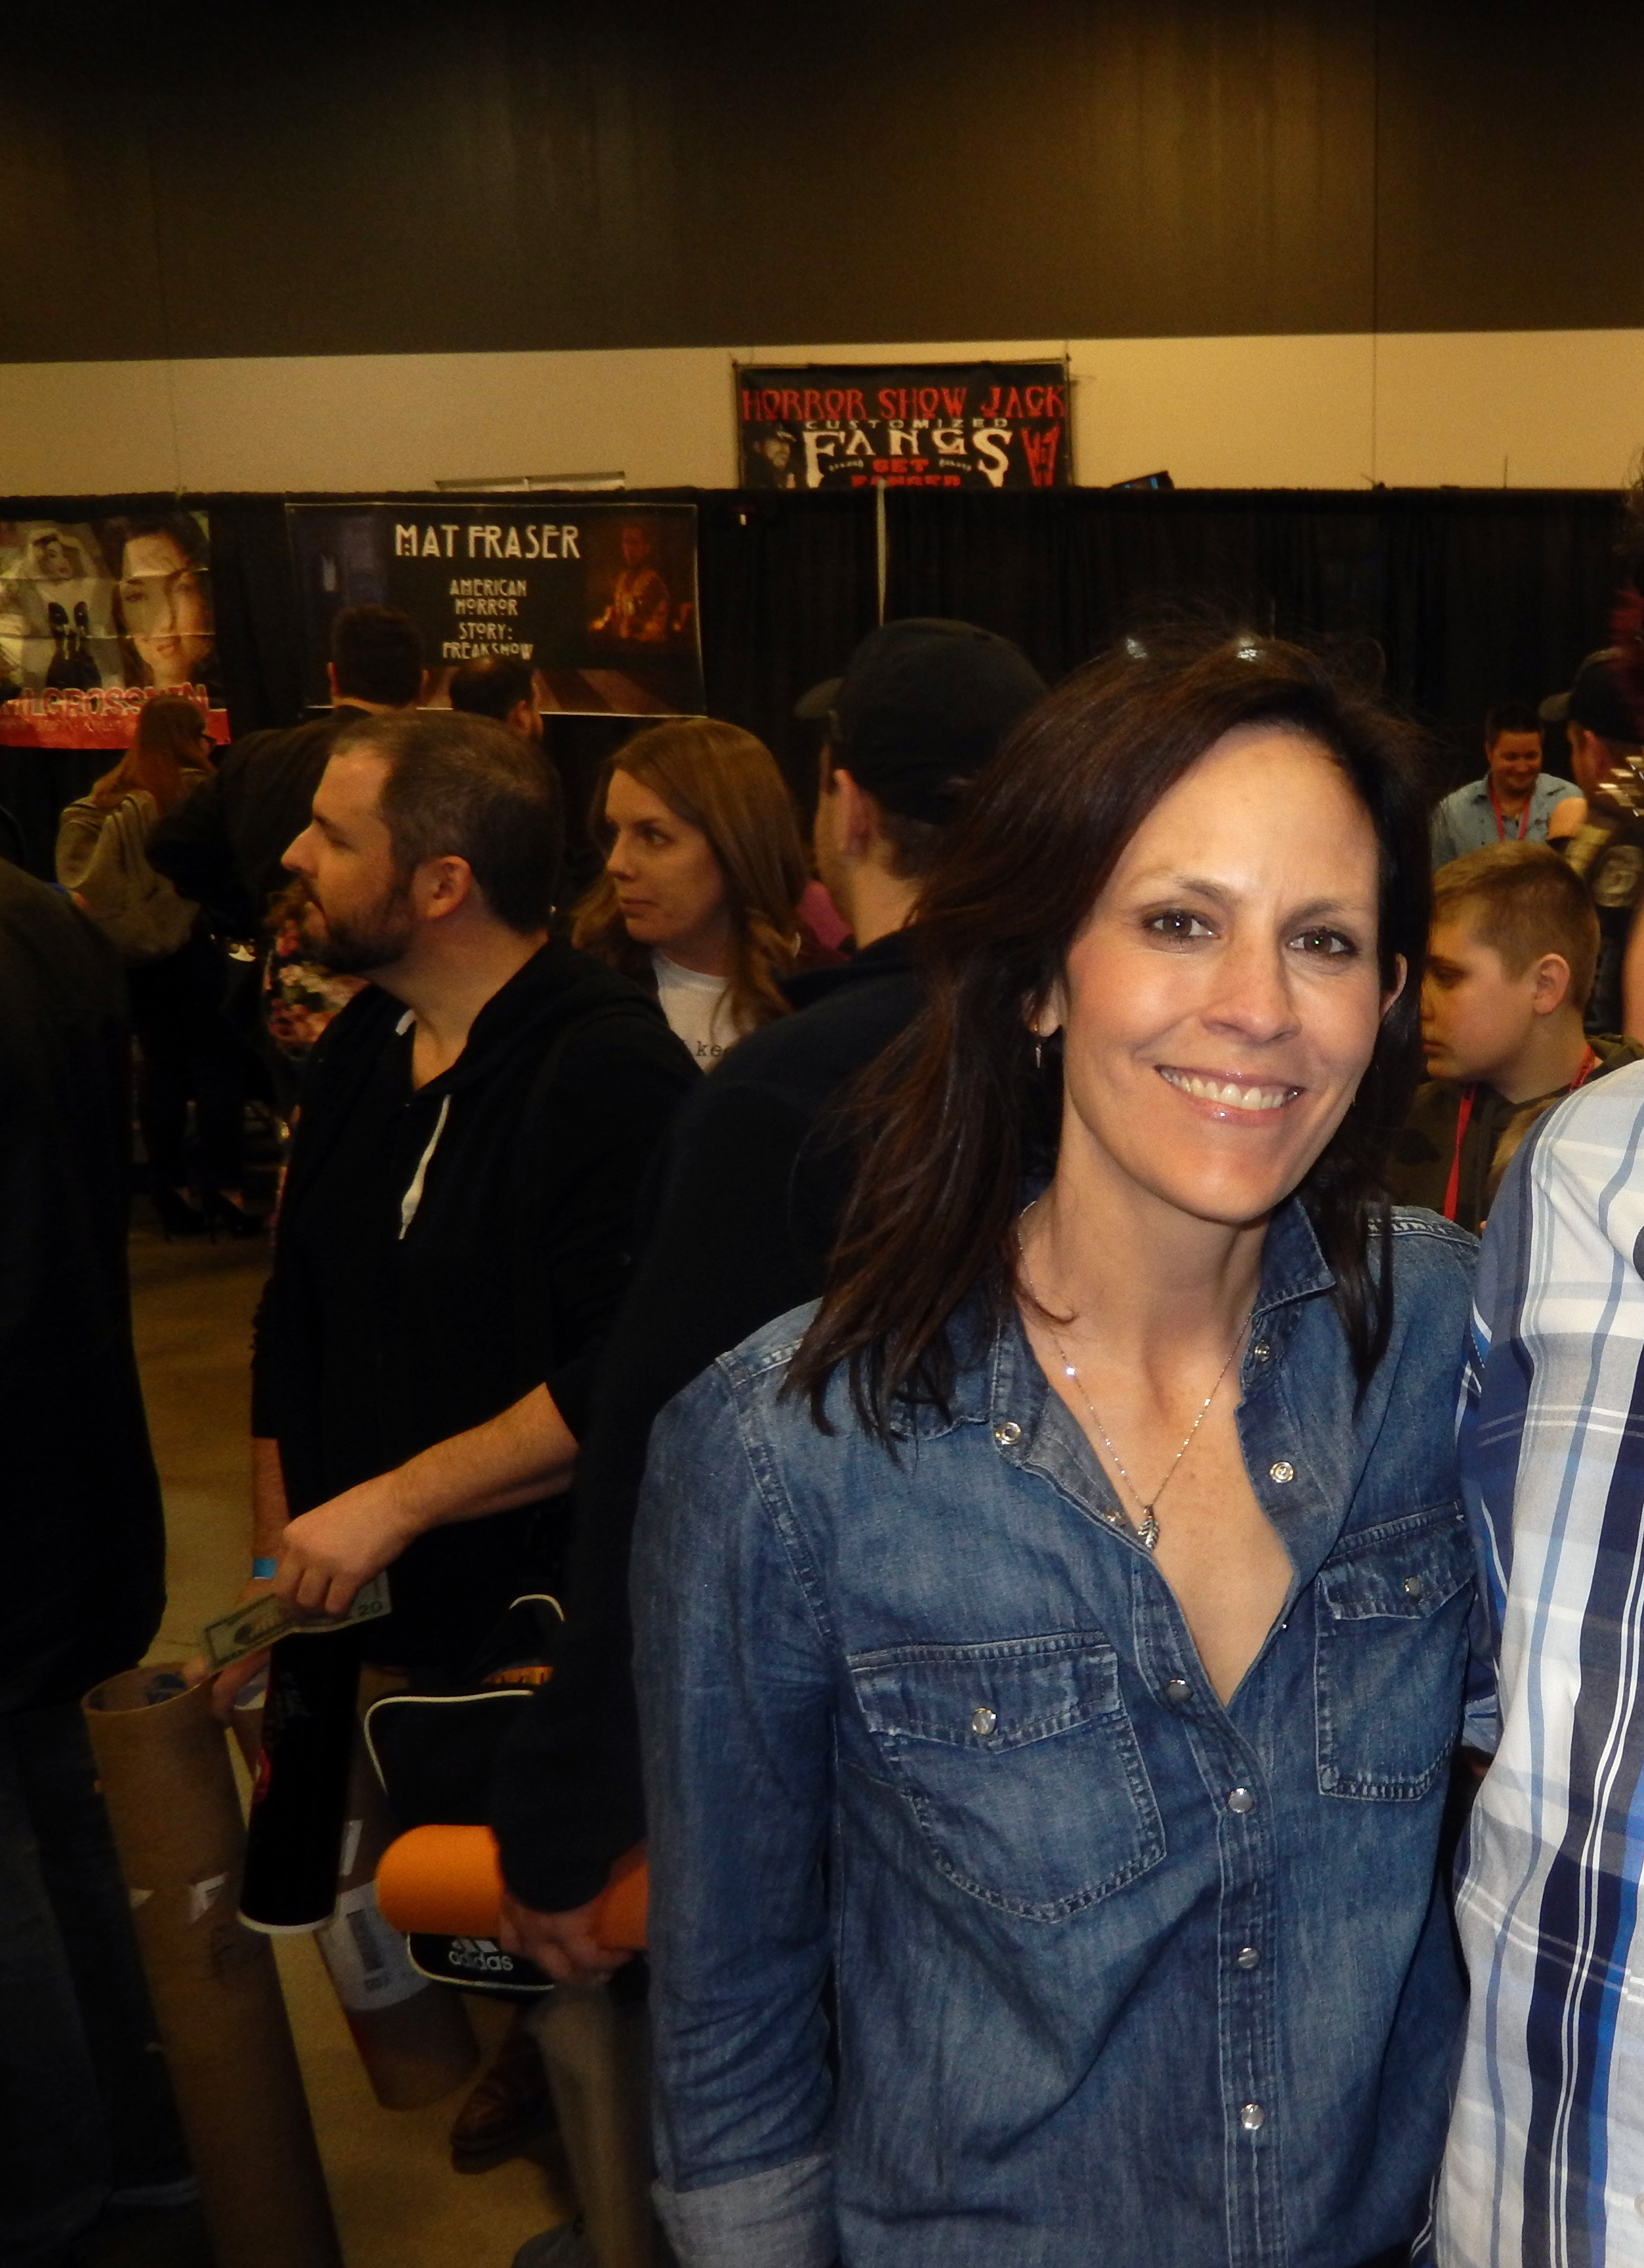 Of annabeth gish pictures 41 Hottest